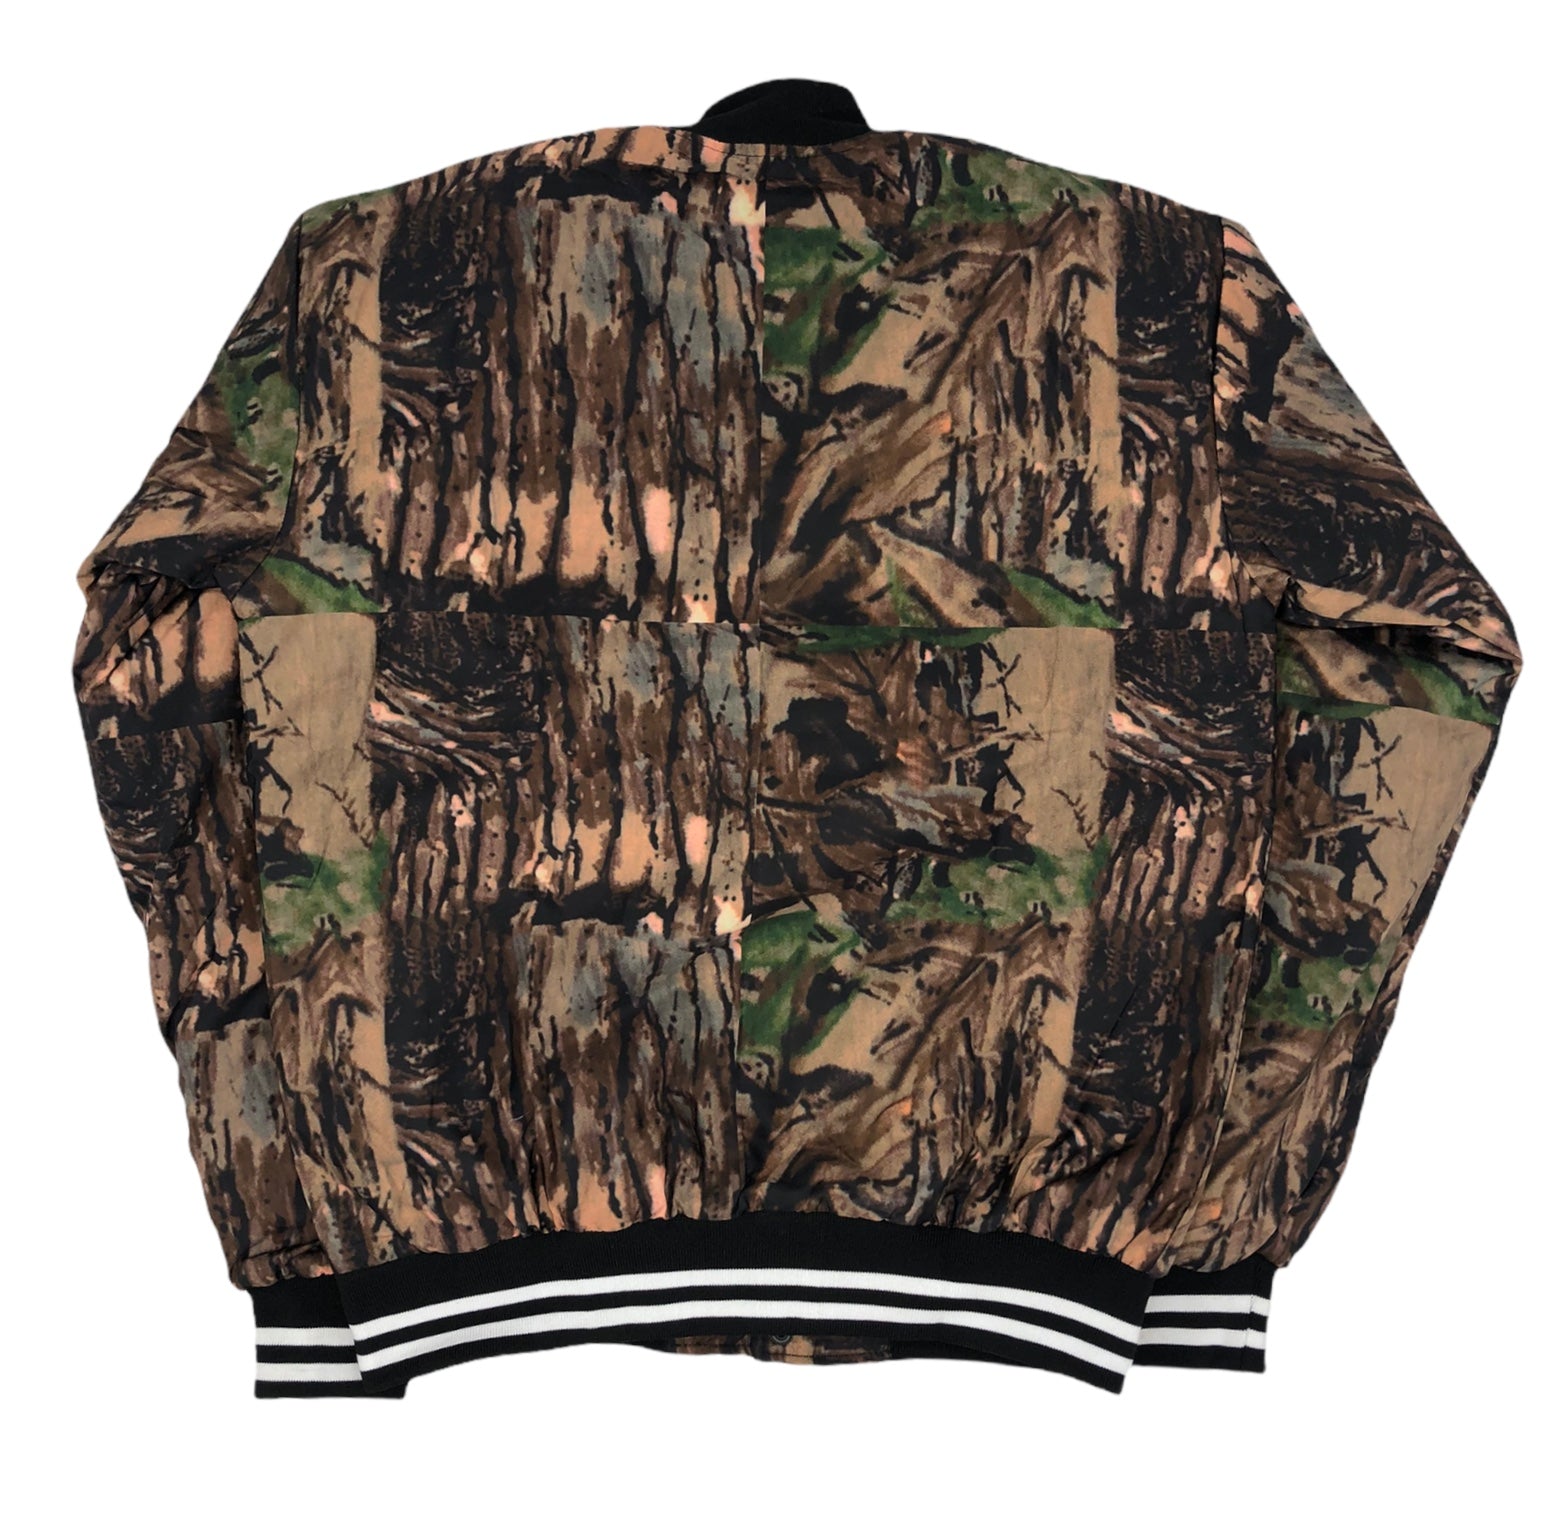 The Ode Outdoor Ready Camo Jacket